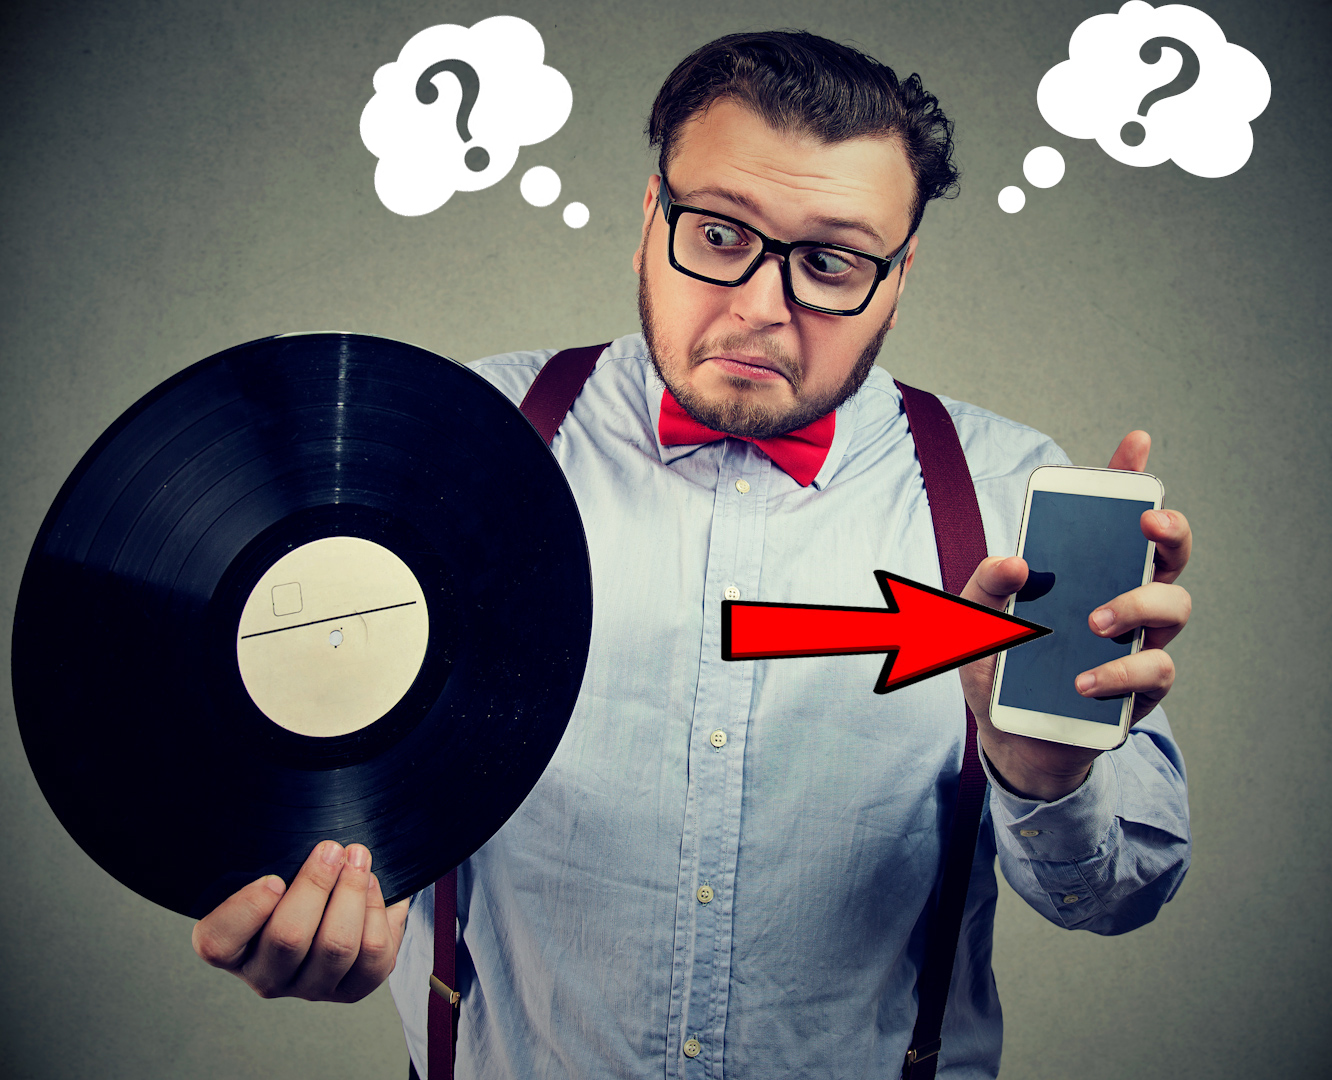 man wants to convert his audio record into digital files to play on his phone